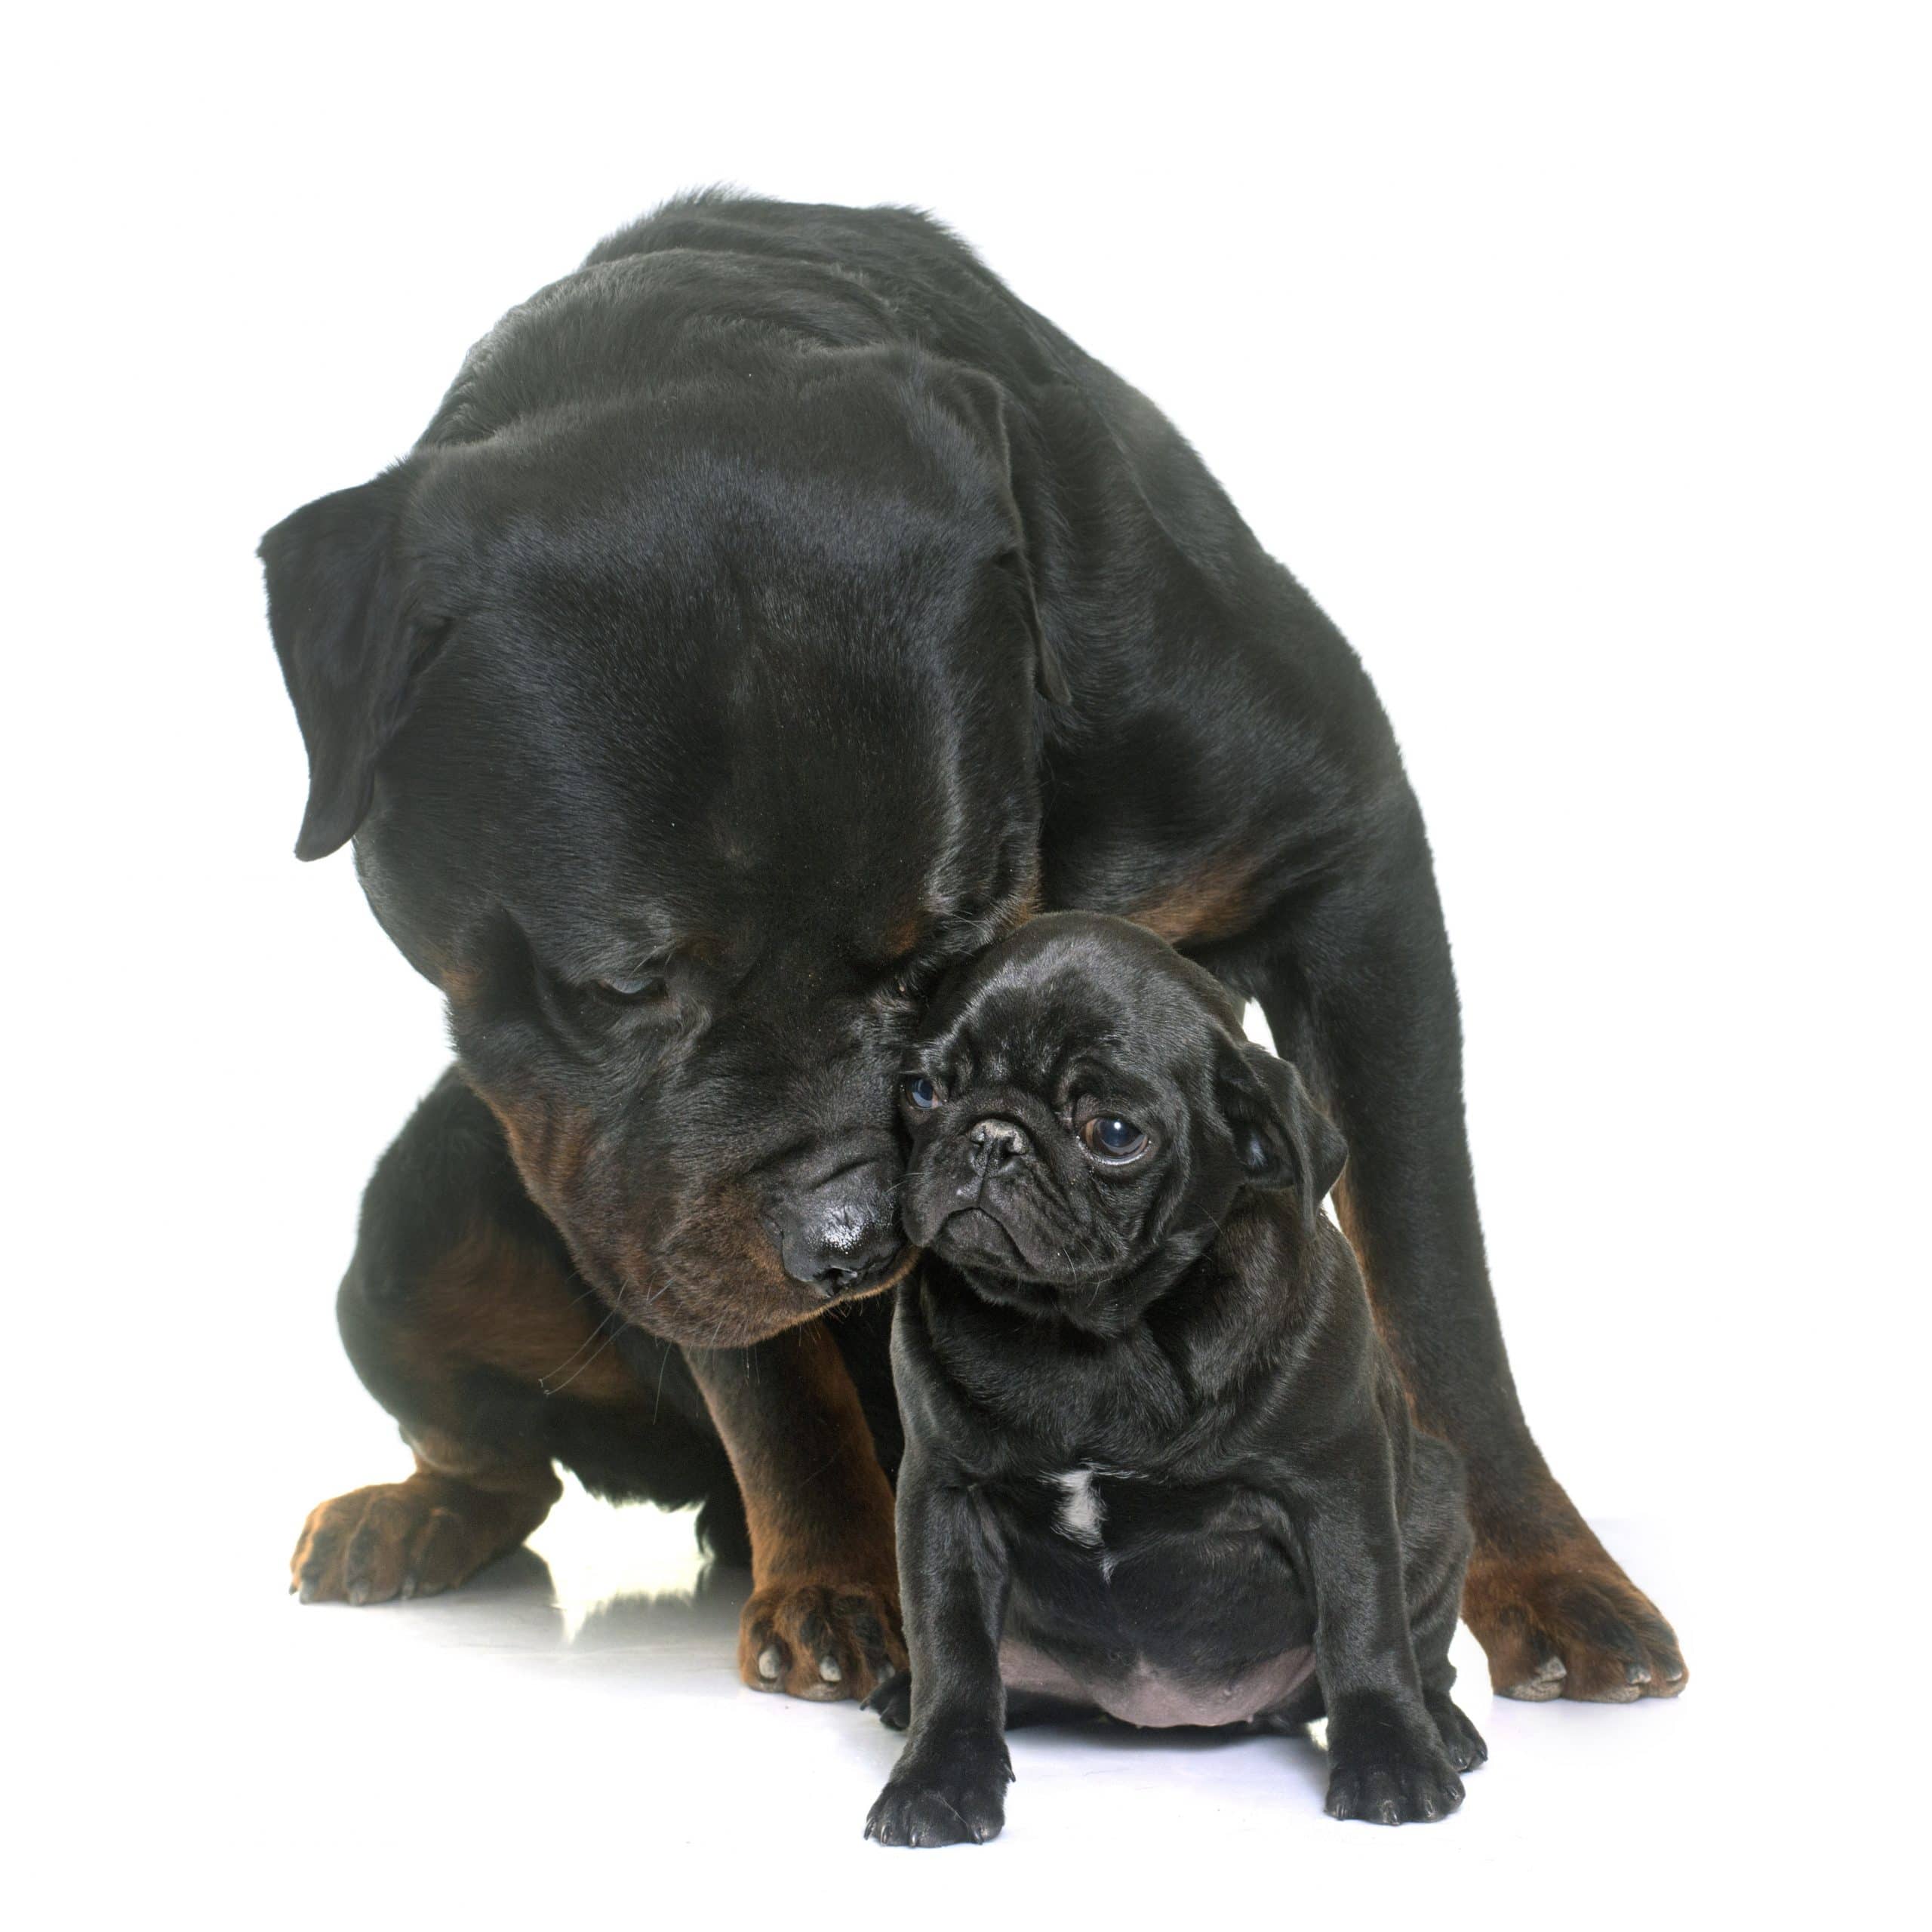 Do Rottweilers and Pugs Get Along? - (Answered & Explained)